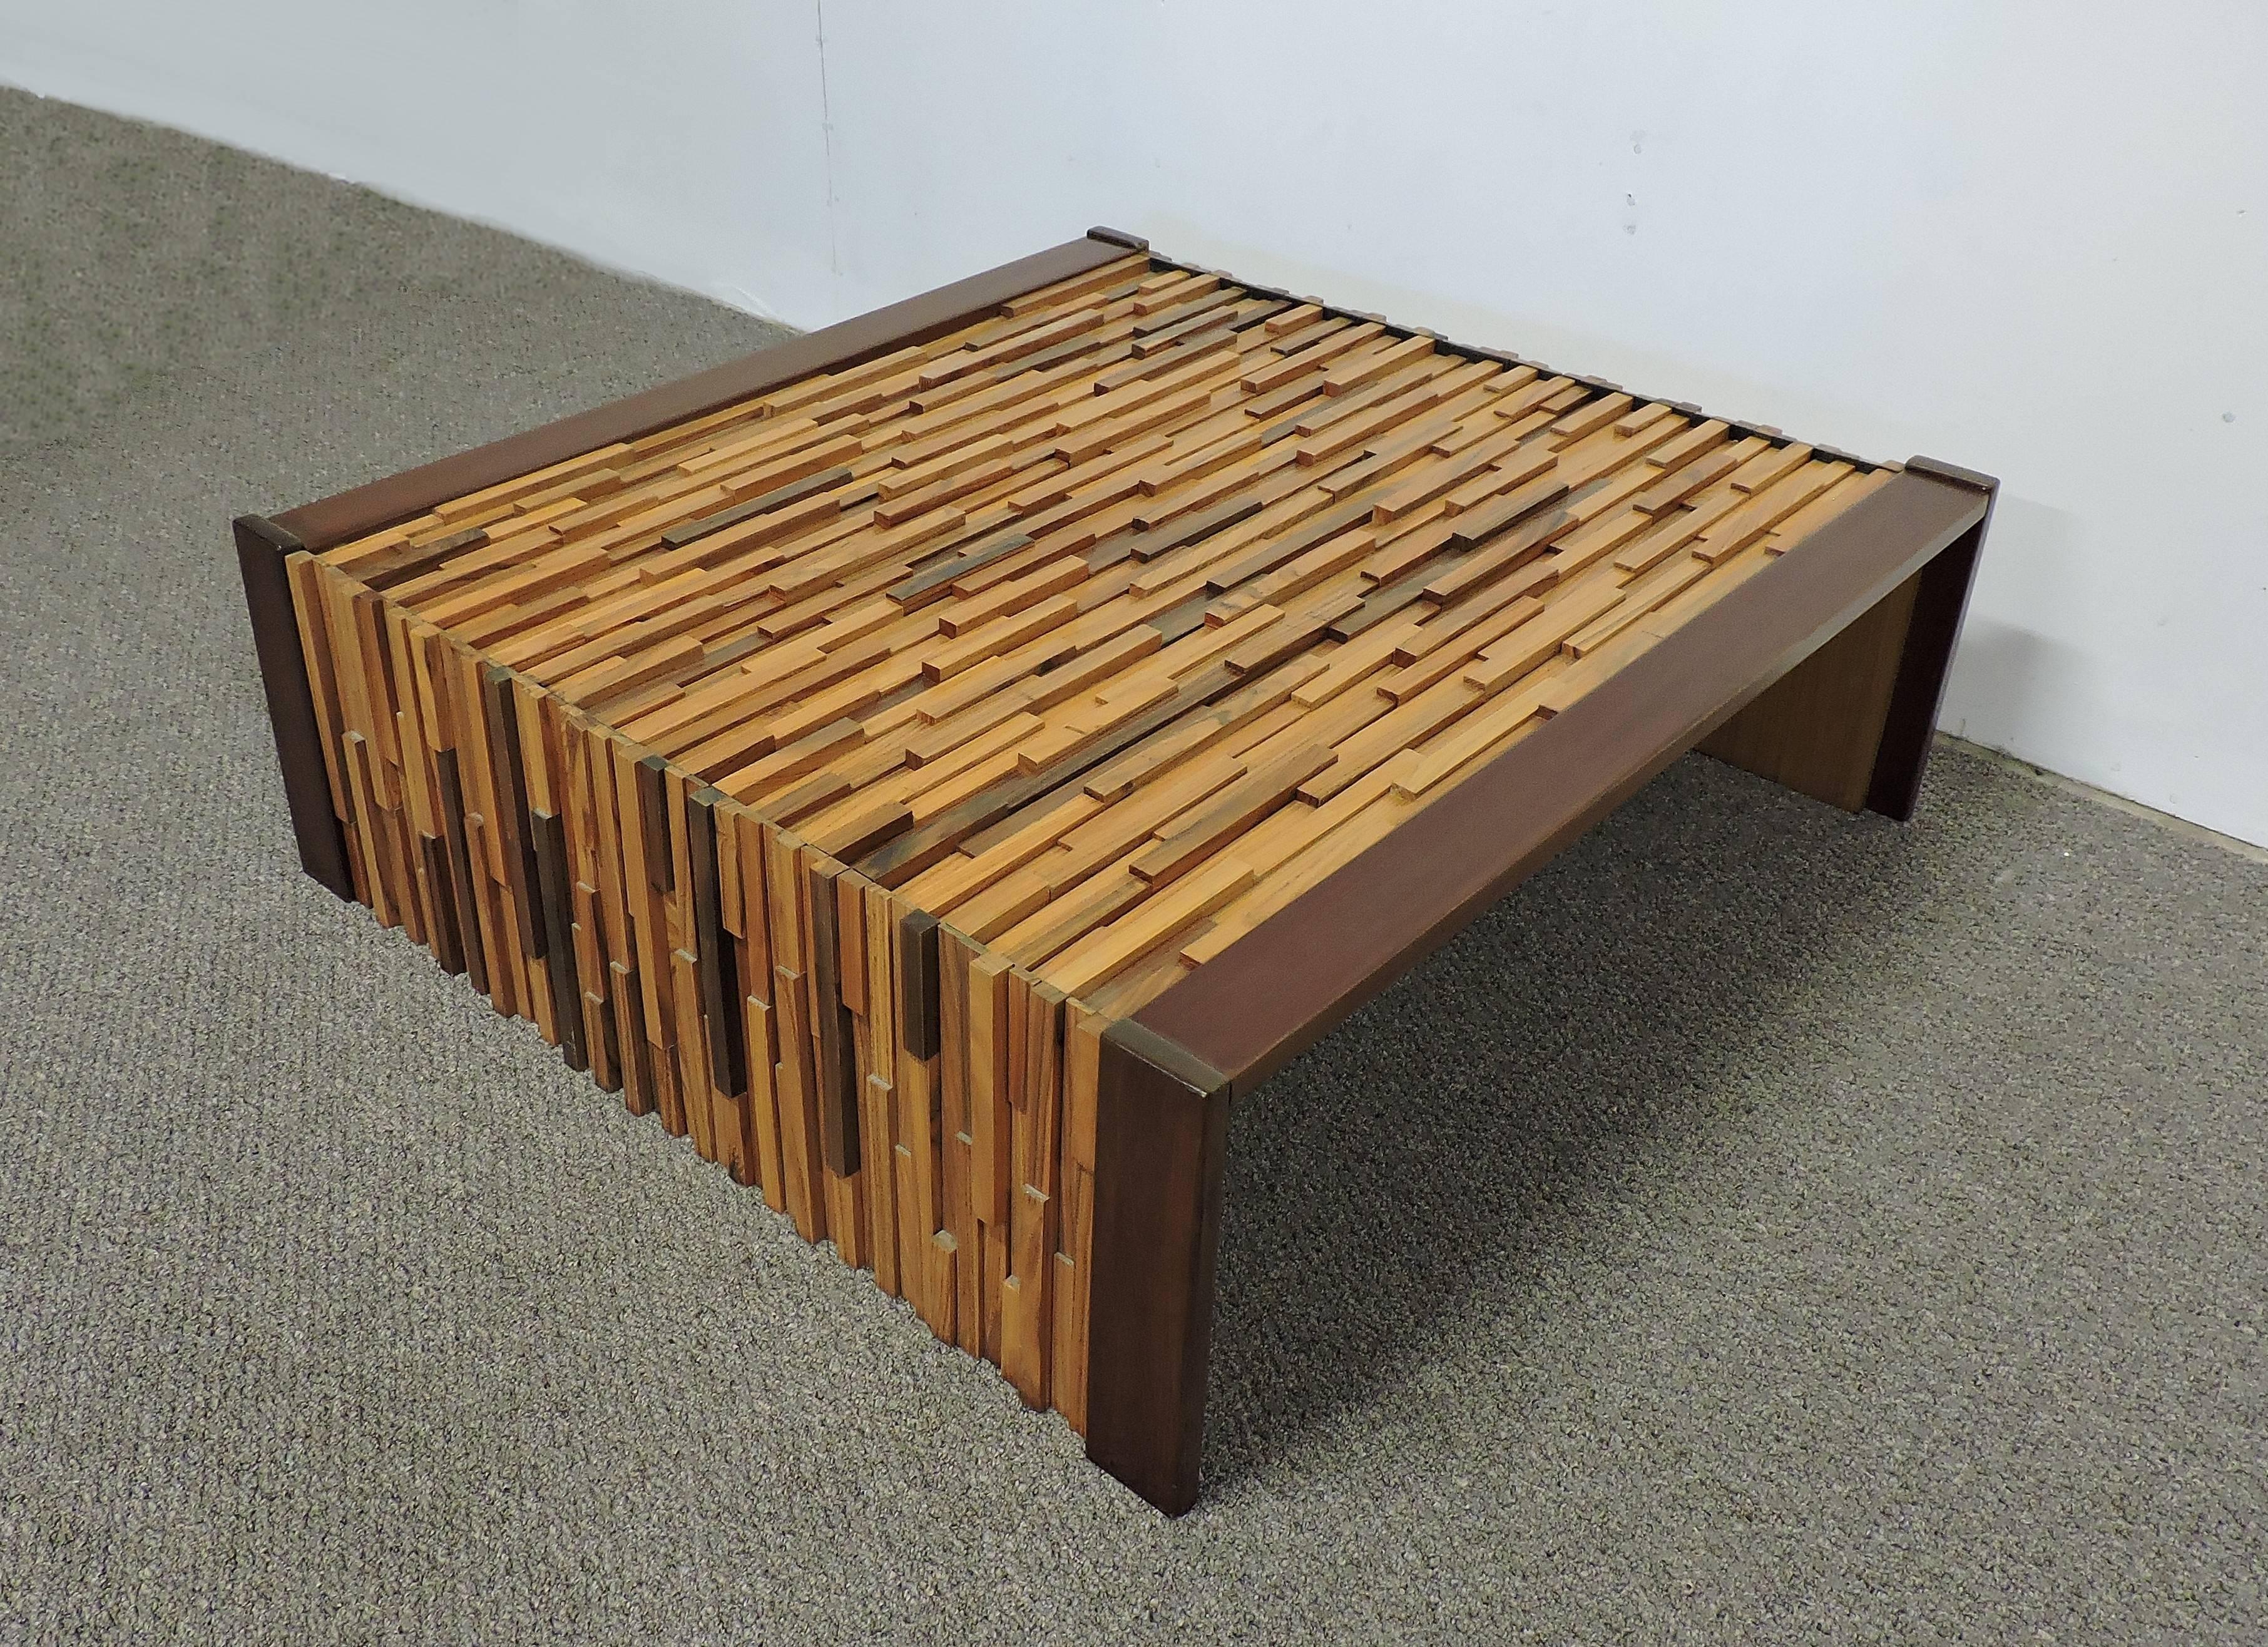 Unique and large coffee or cocktail table designed by Percival Lafer and made in Brazil. This table is made of varying lengths of exotic wood blocks giving it a very sculptural look and has rosewood edges for contrast. Included is the original glass